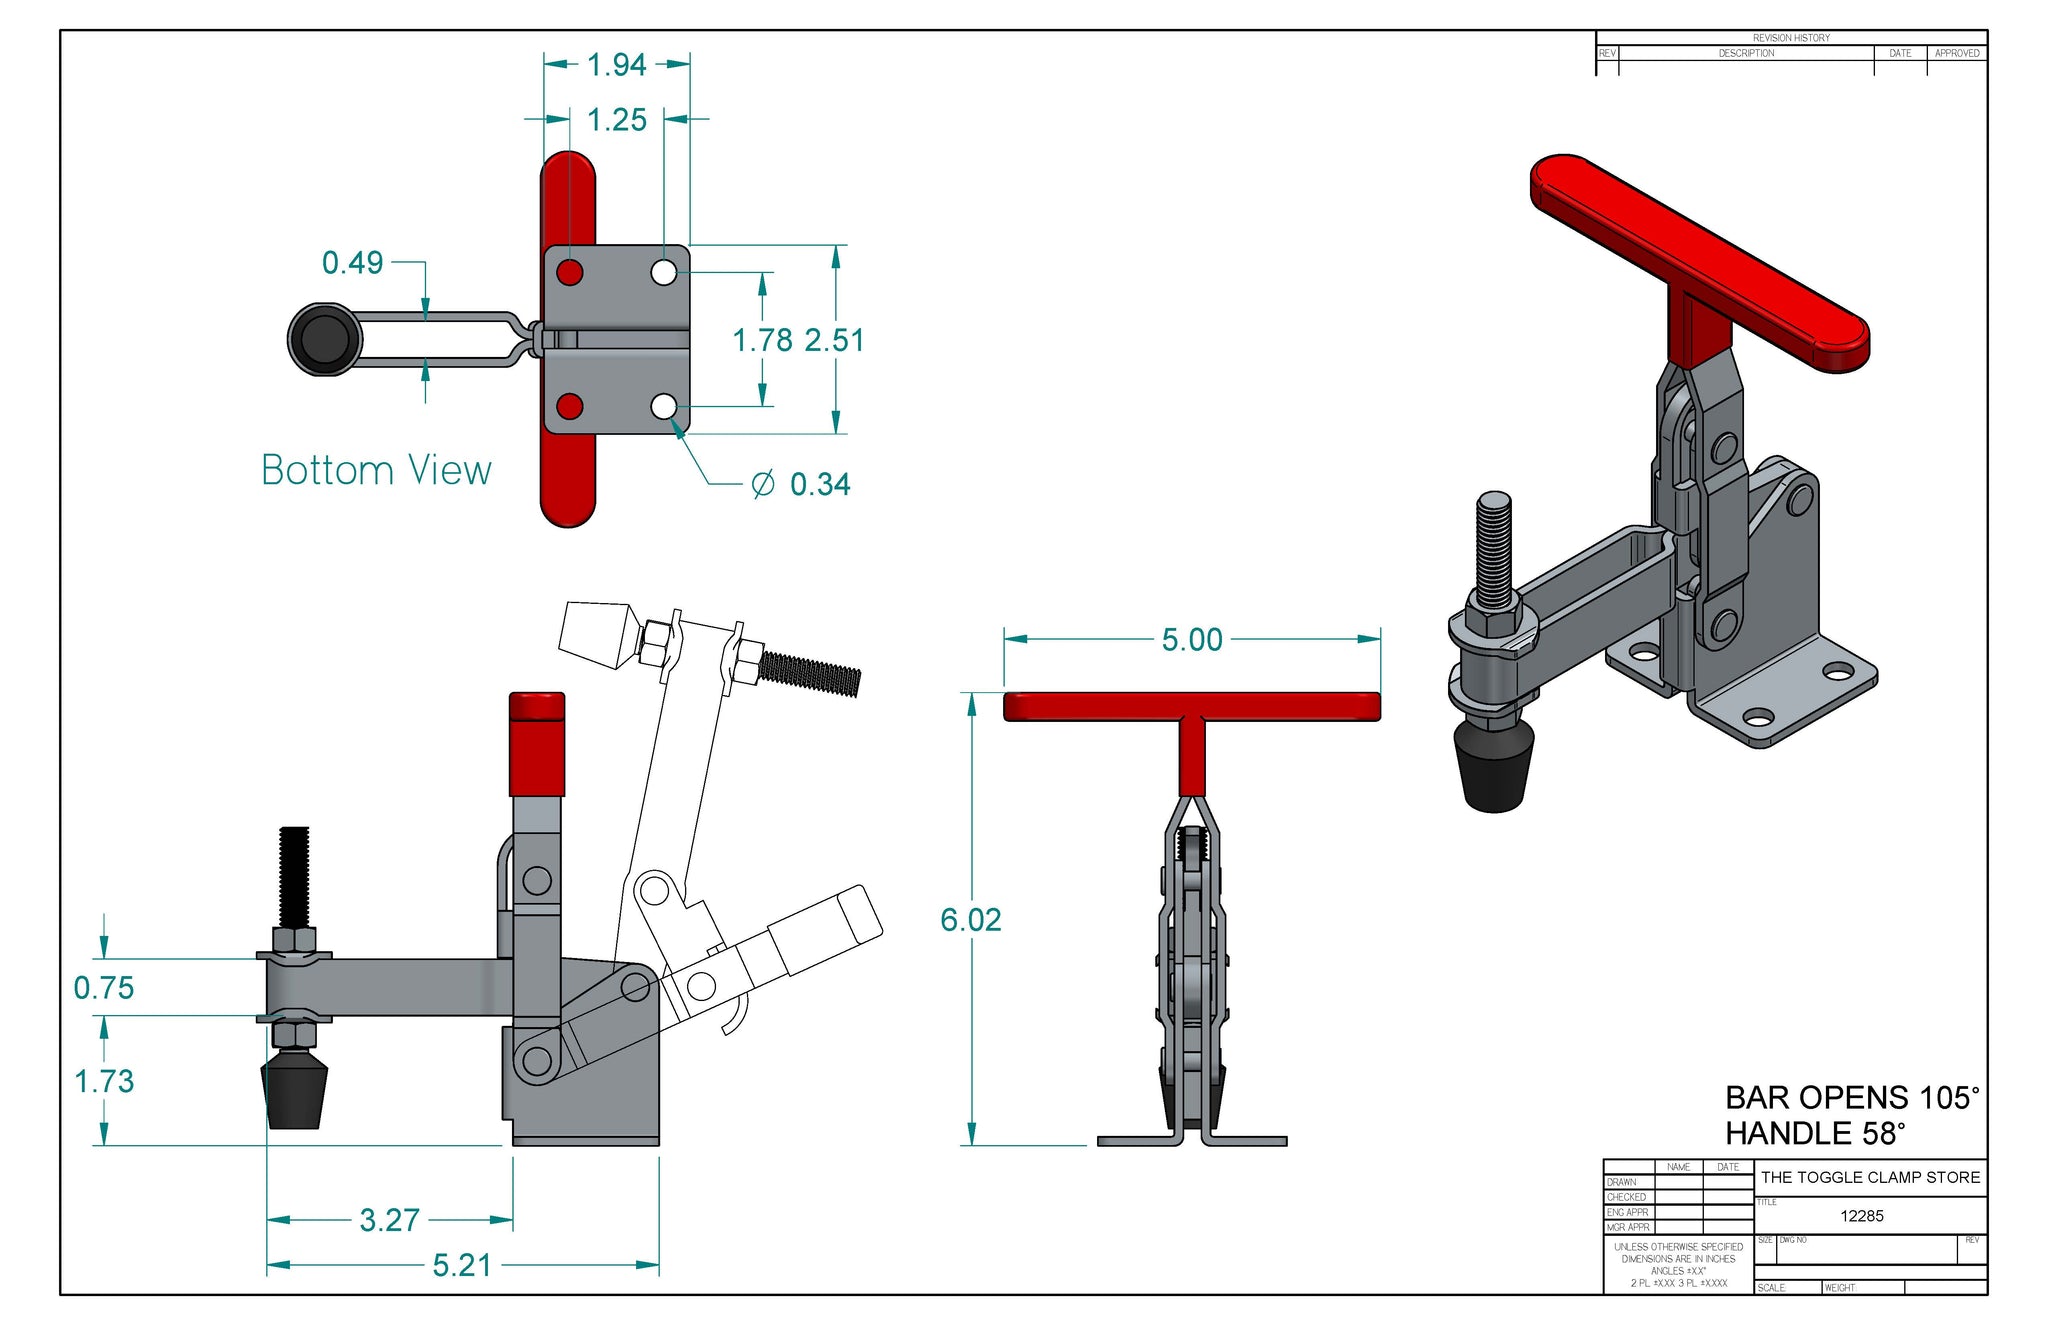 VH-12285 Vertical Handle Toggle Clamp (Cross Referenced: 210-TU)